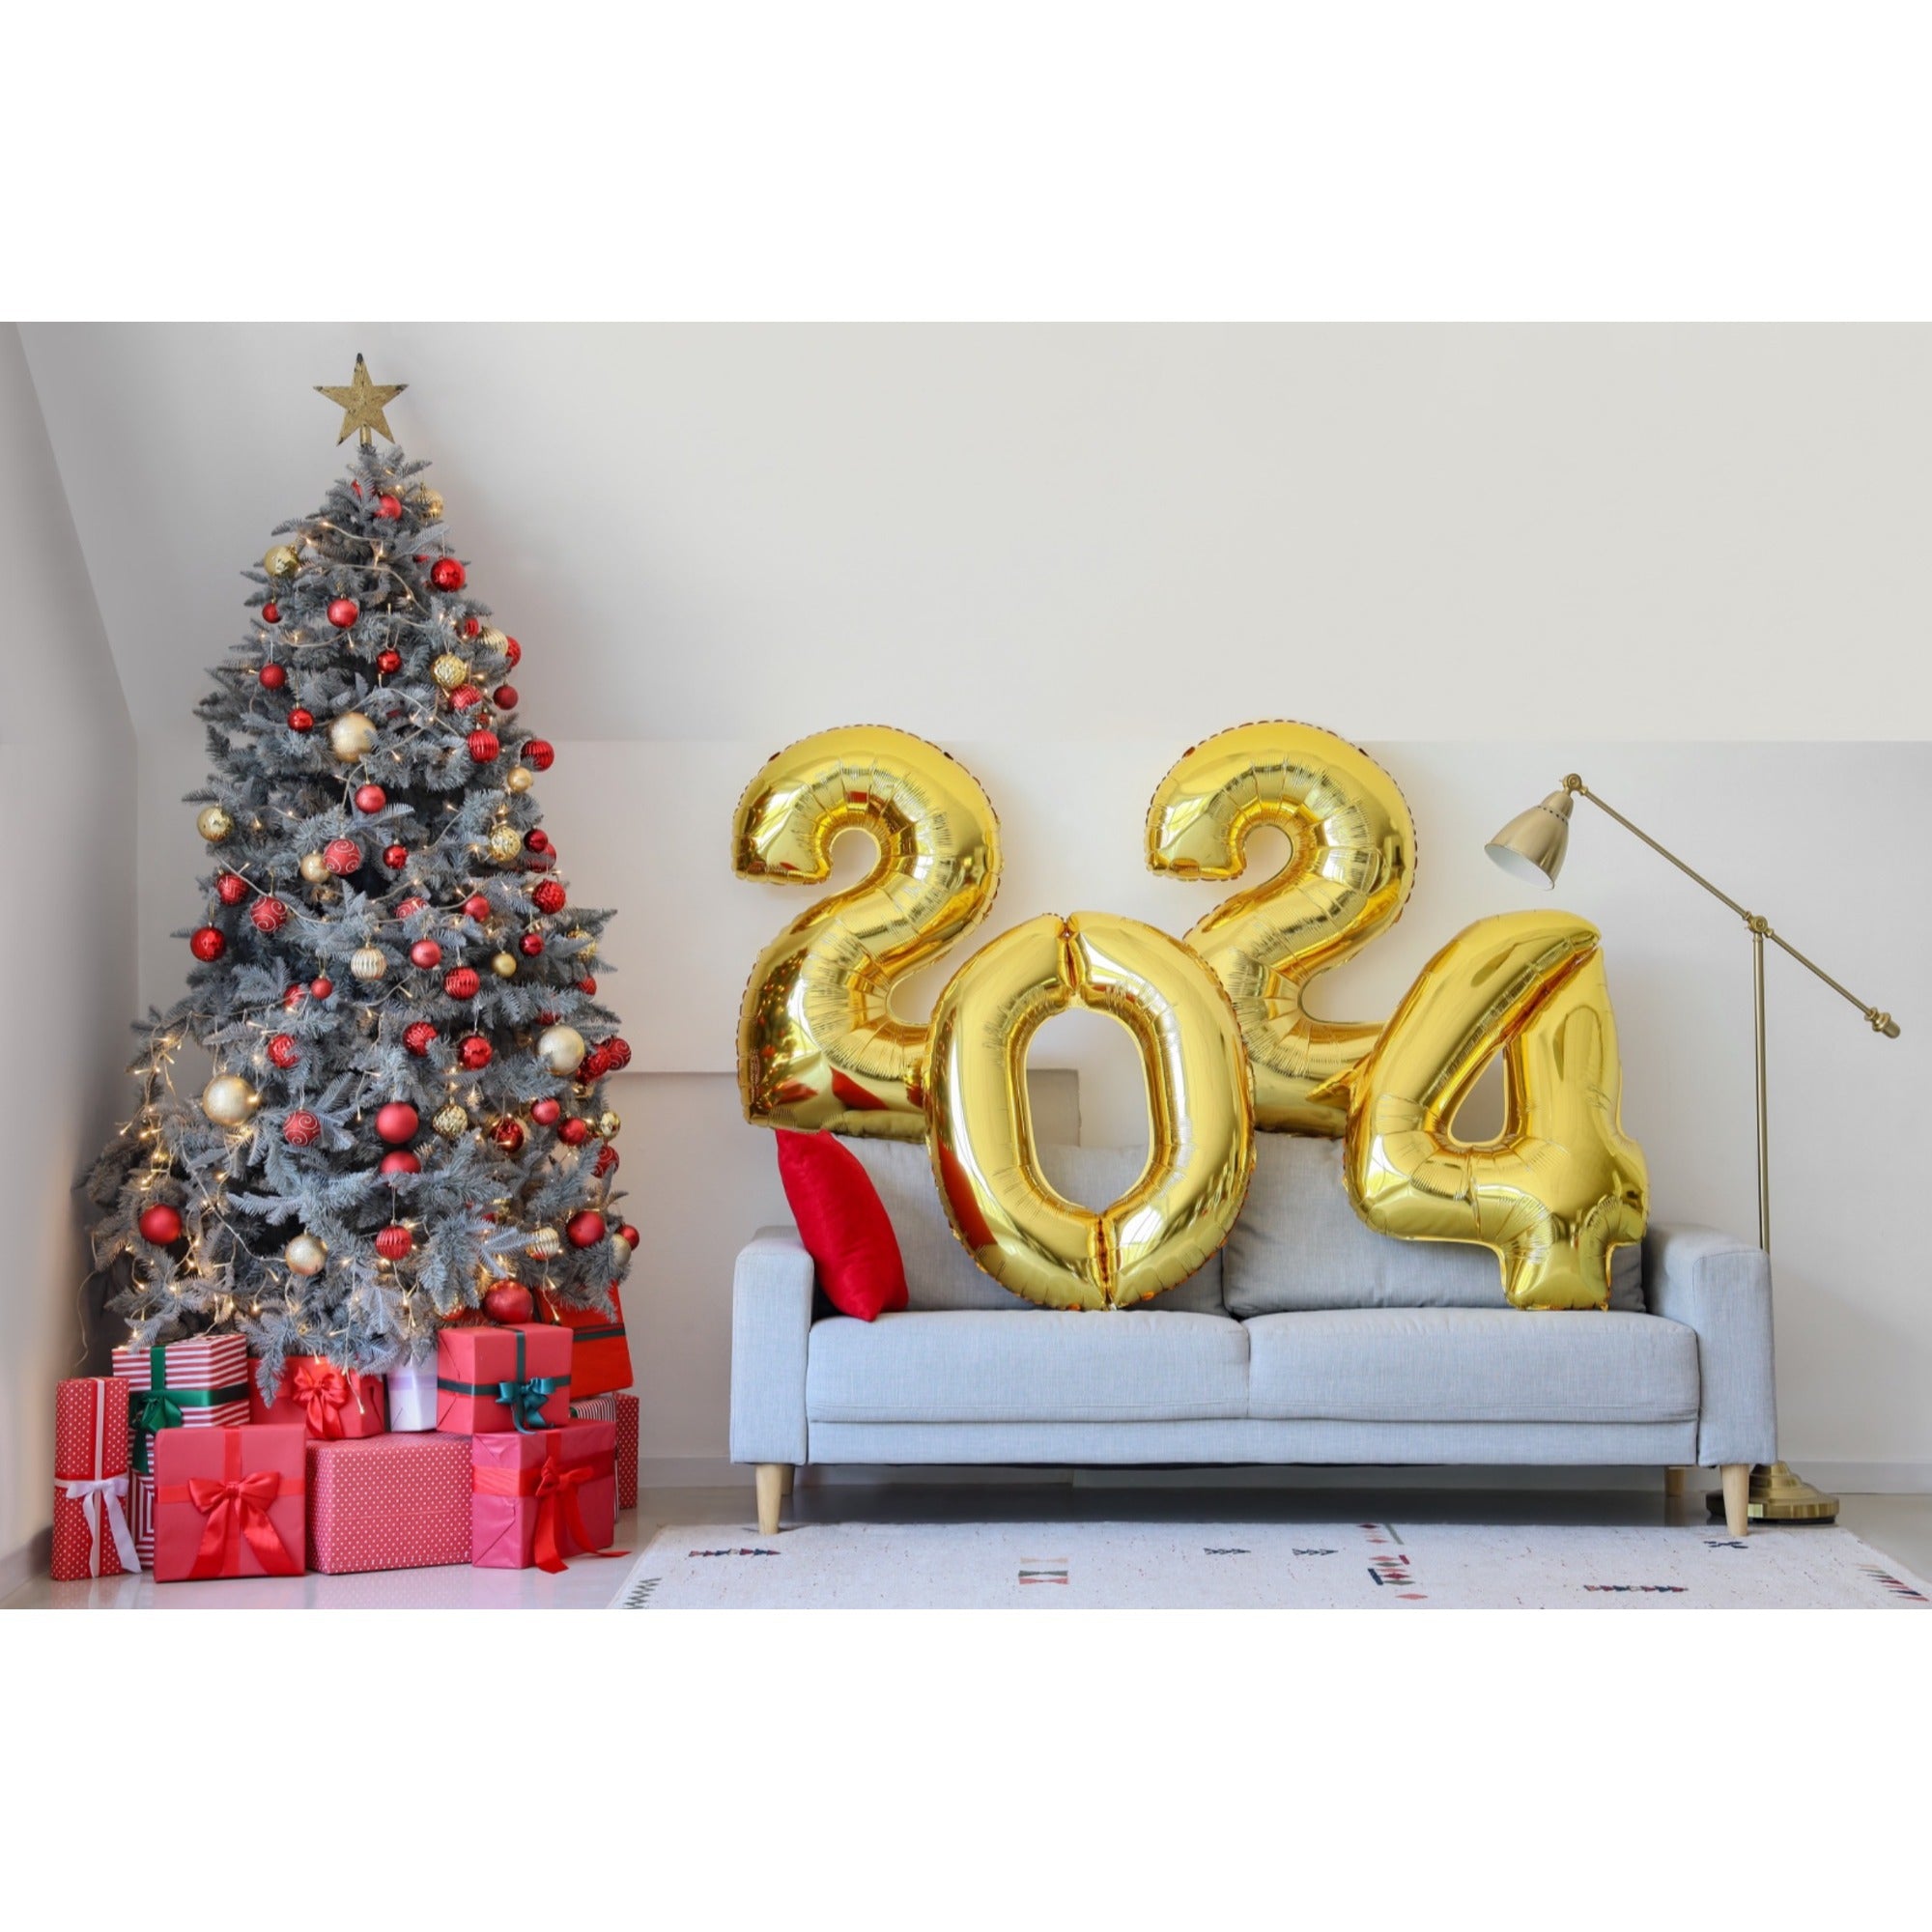 2024 Gold Balloons Grad Prom Birthday New Years Numbers Giant Graduation 40 Inch